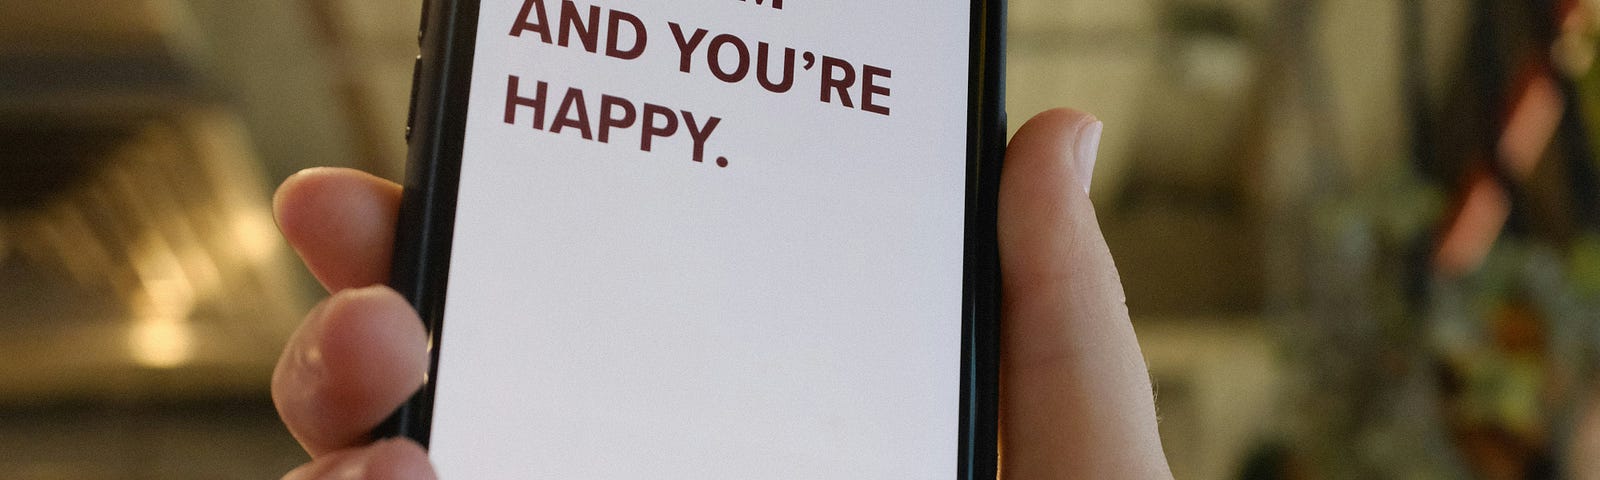 A picture of a cellphone in someone’s hand and on the screen it says “it’s 9AM and you’re happy.